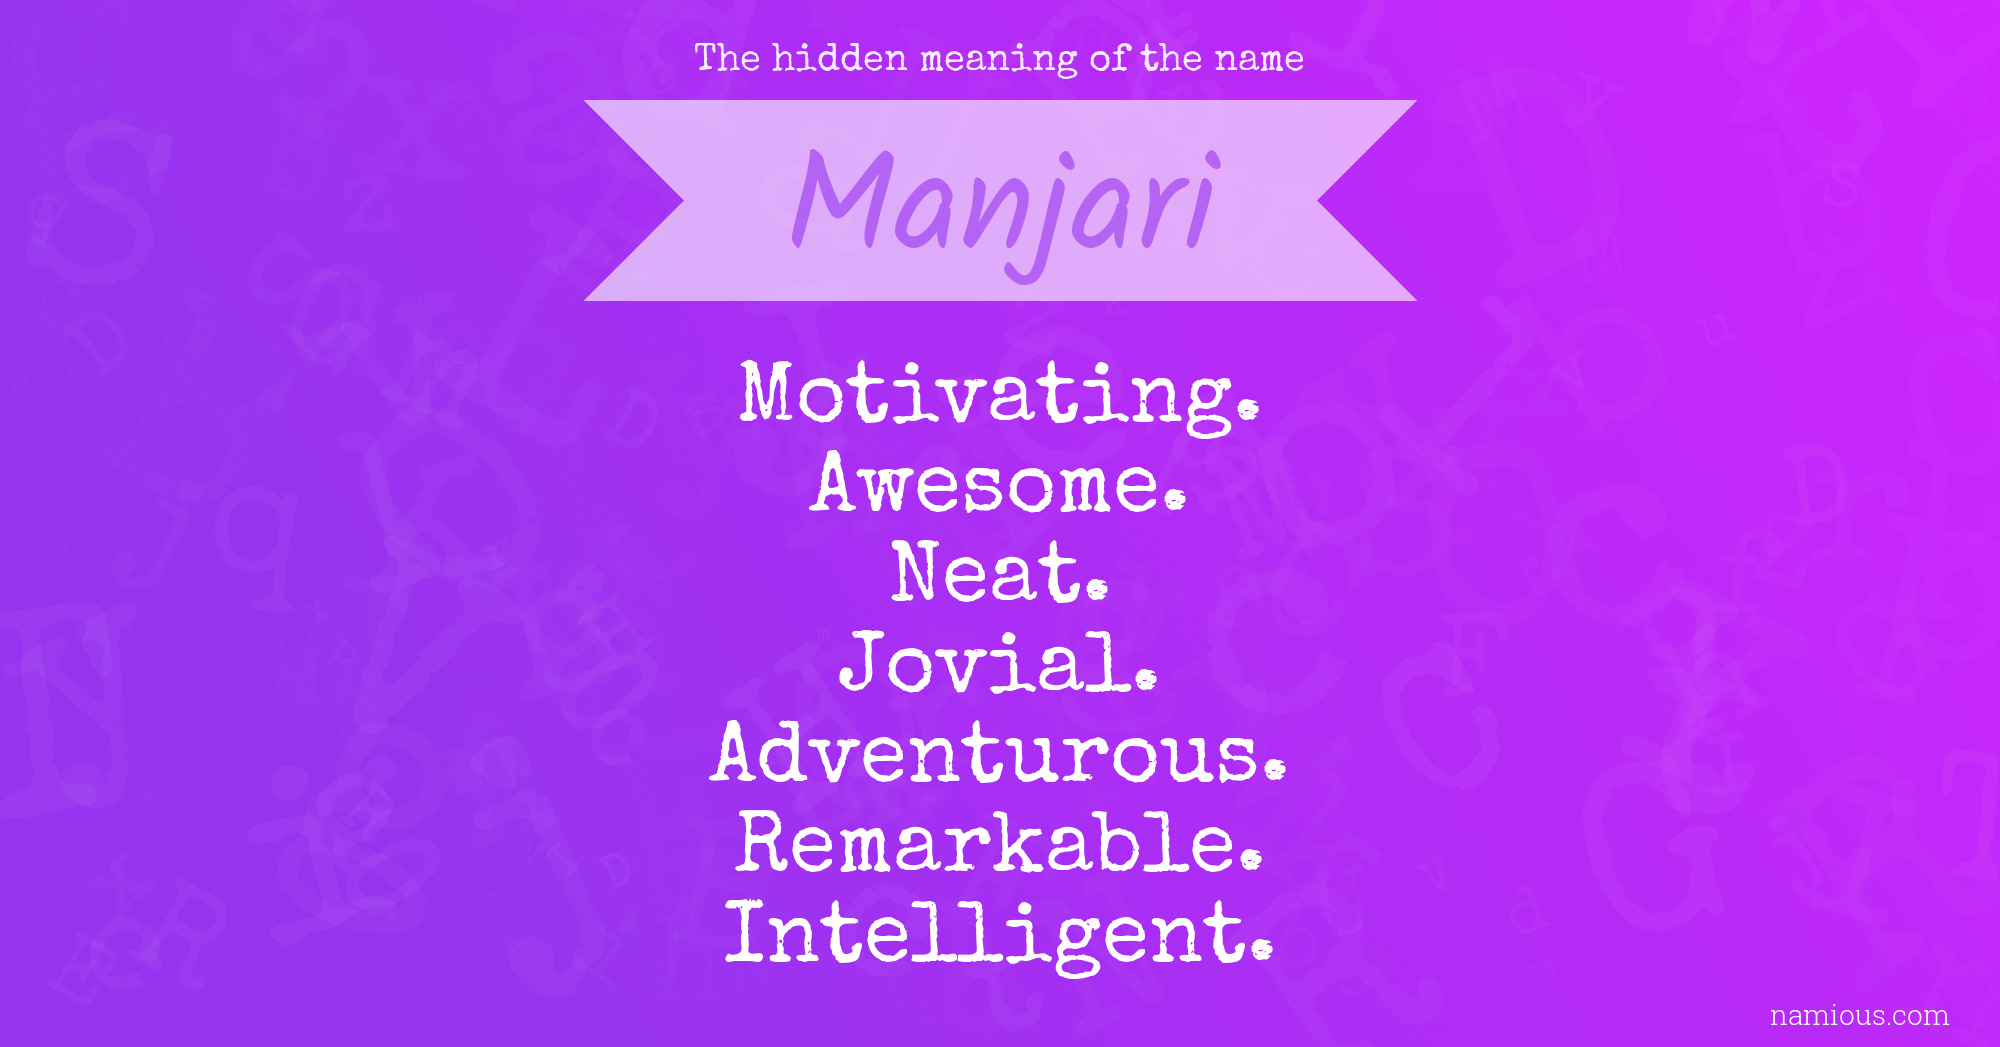 The hidden meaning of the name Manjari